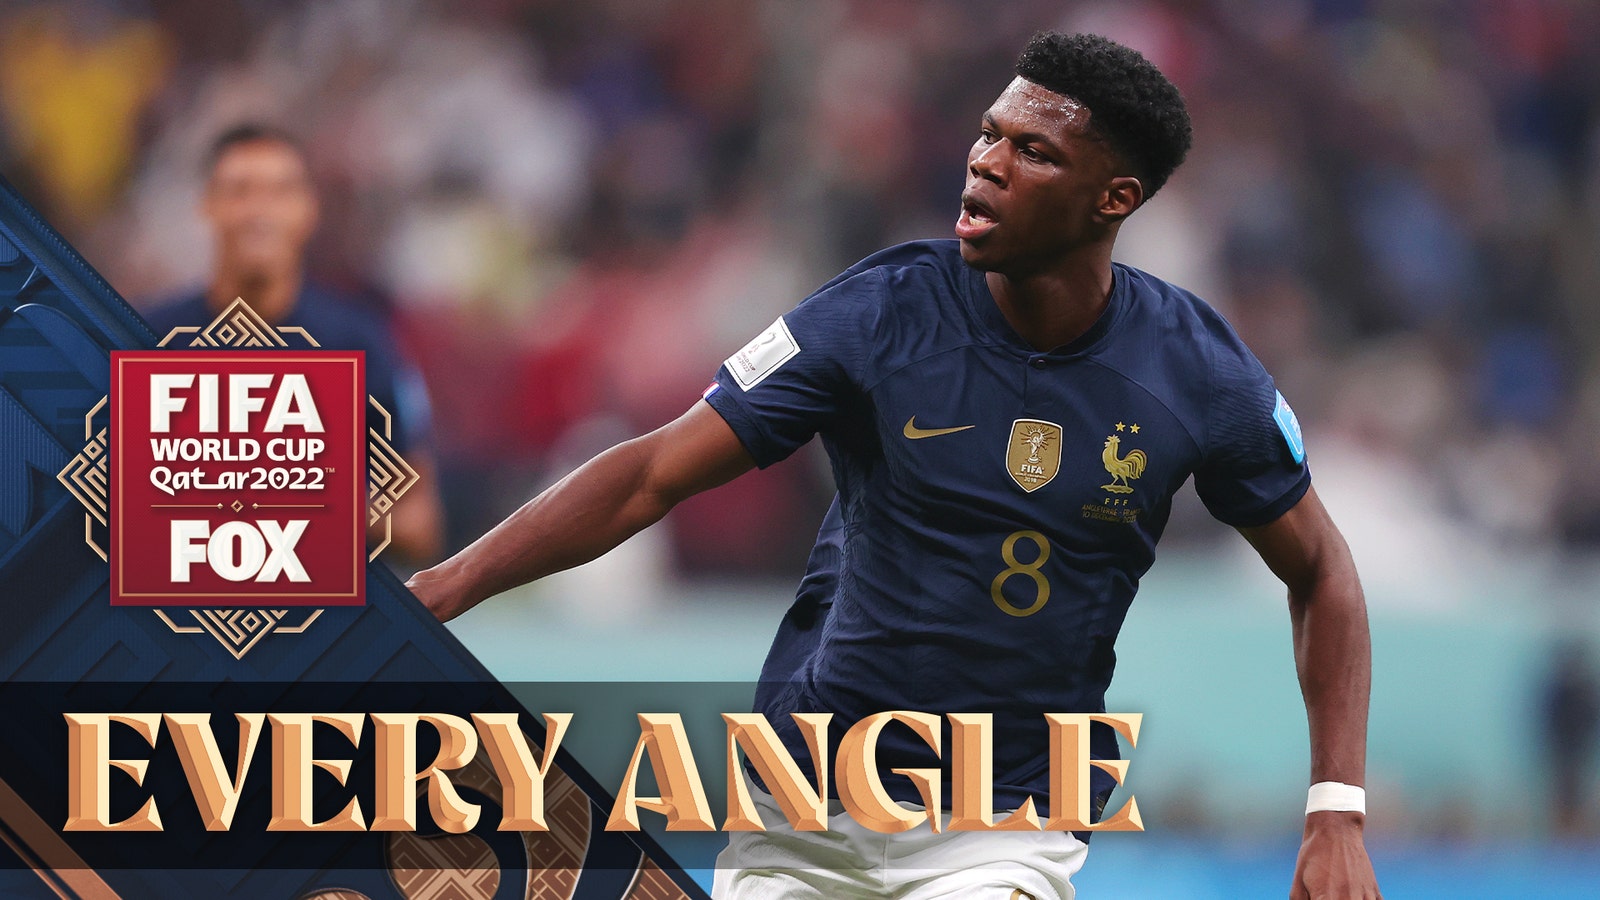 Aurelian Chuameni makes a statement after scoring for France at the 2022 FIFA World Cup | All angles